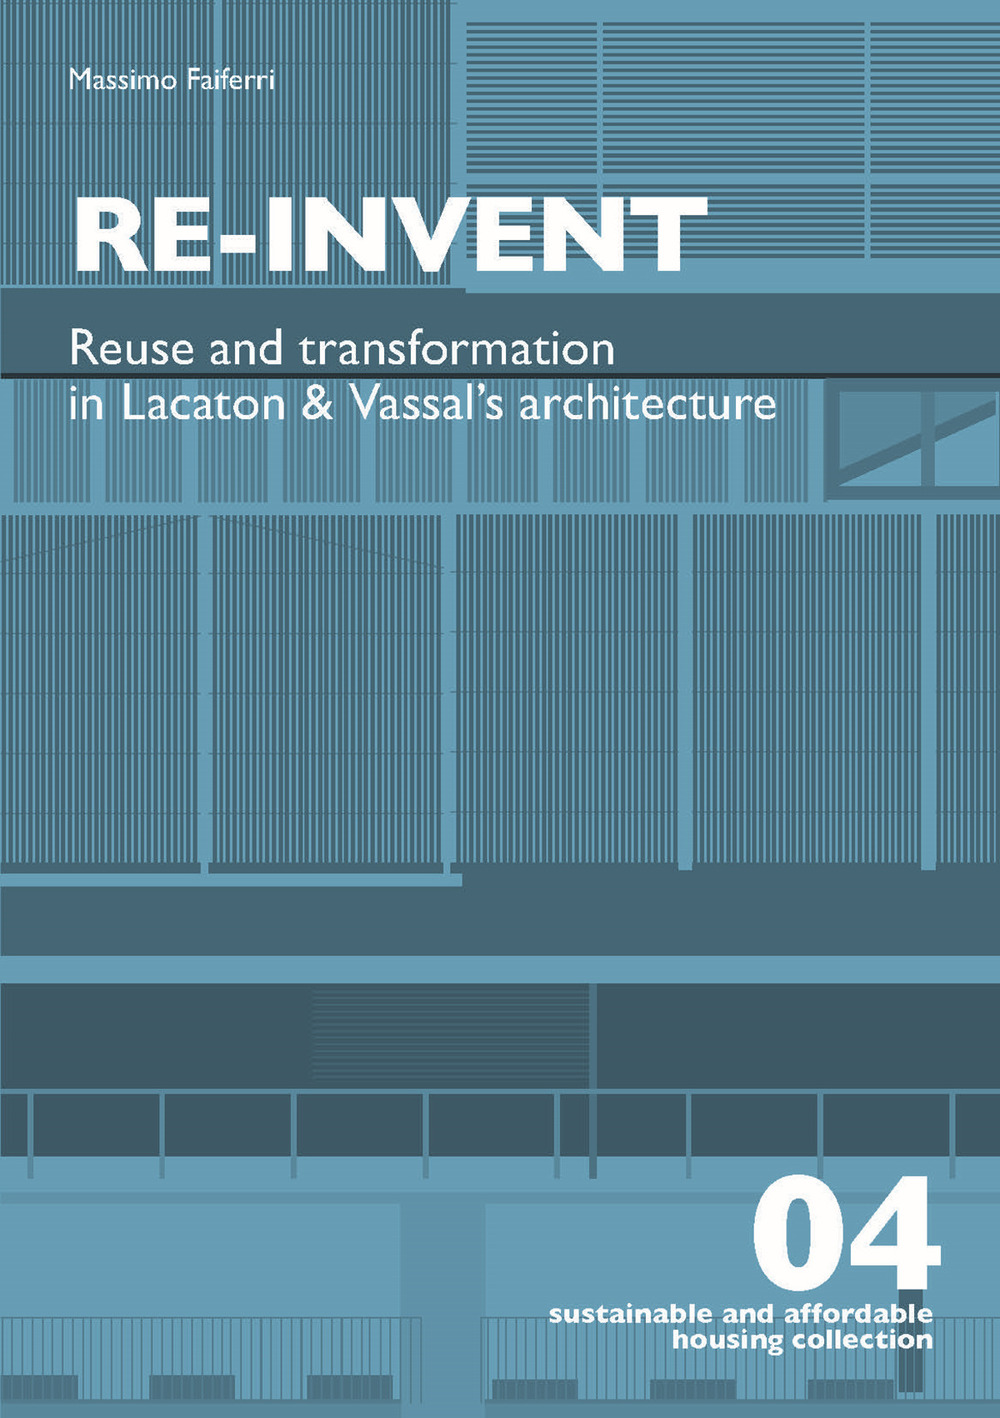 Re-invent. Re-use and transformation in Lacaton and Vassal's architecture